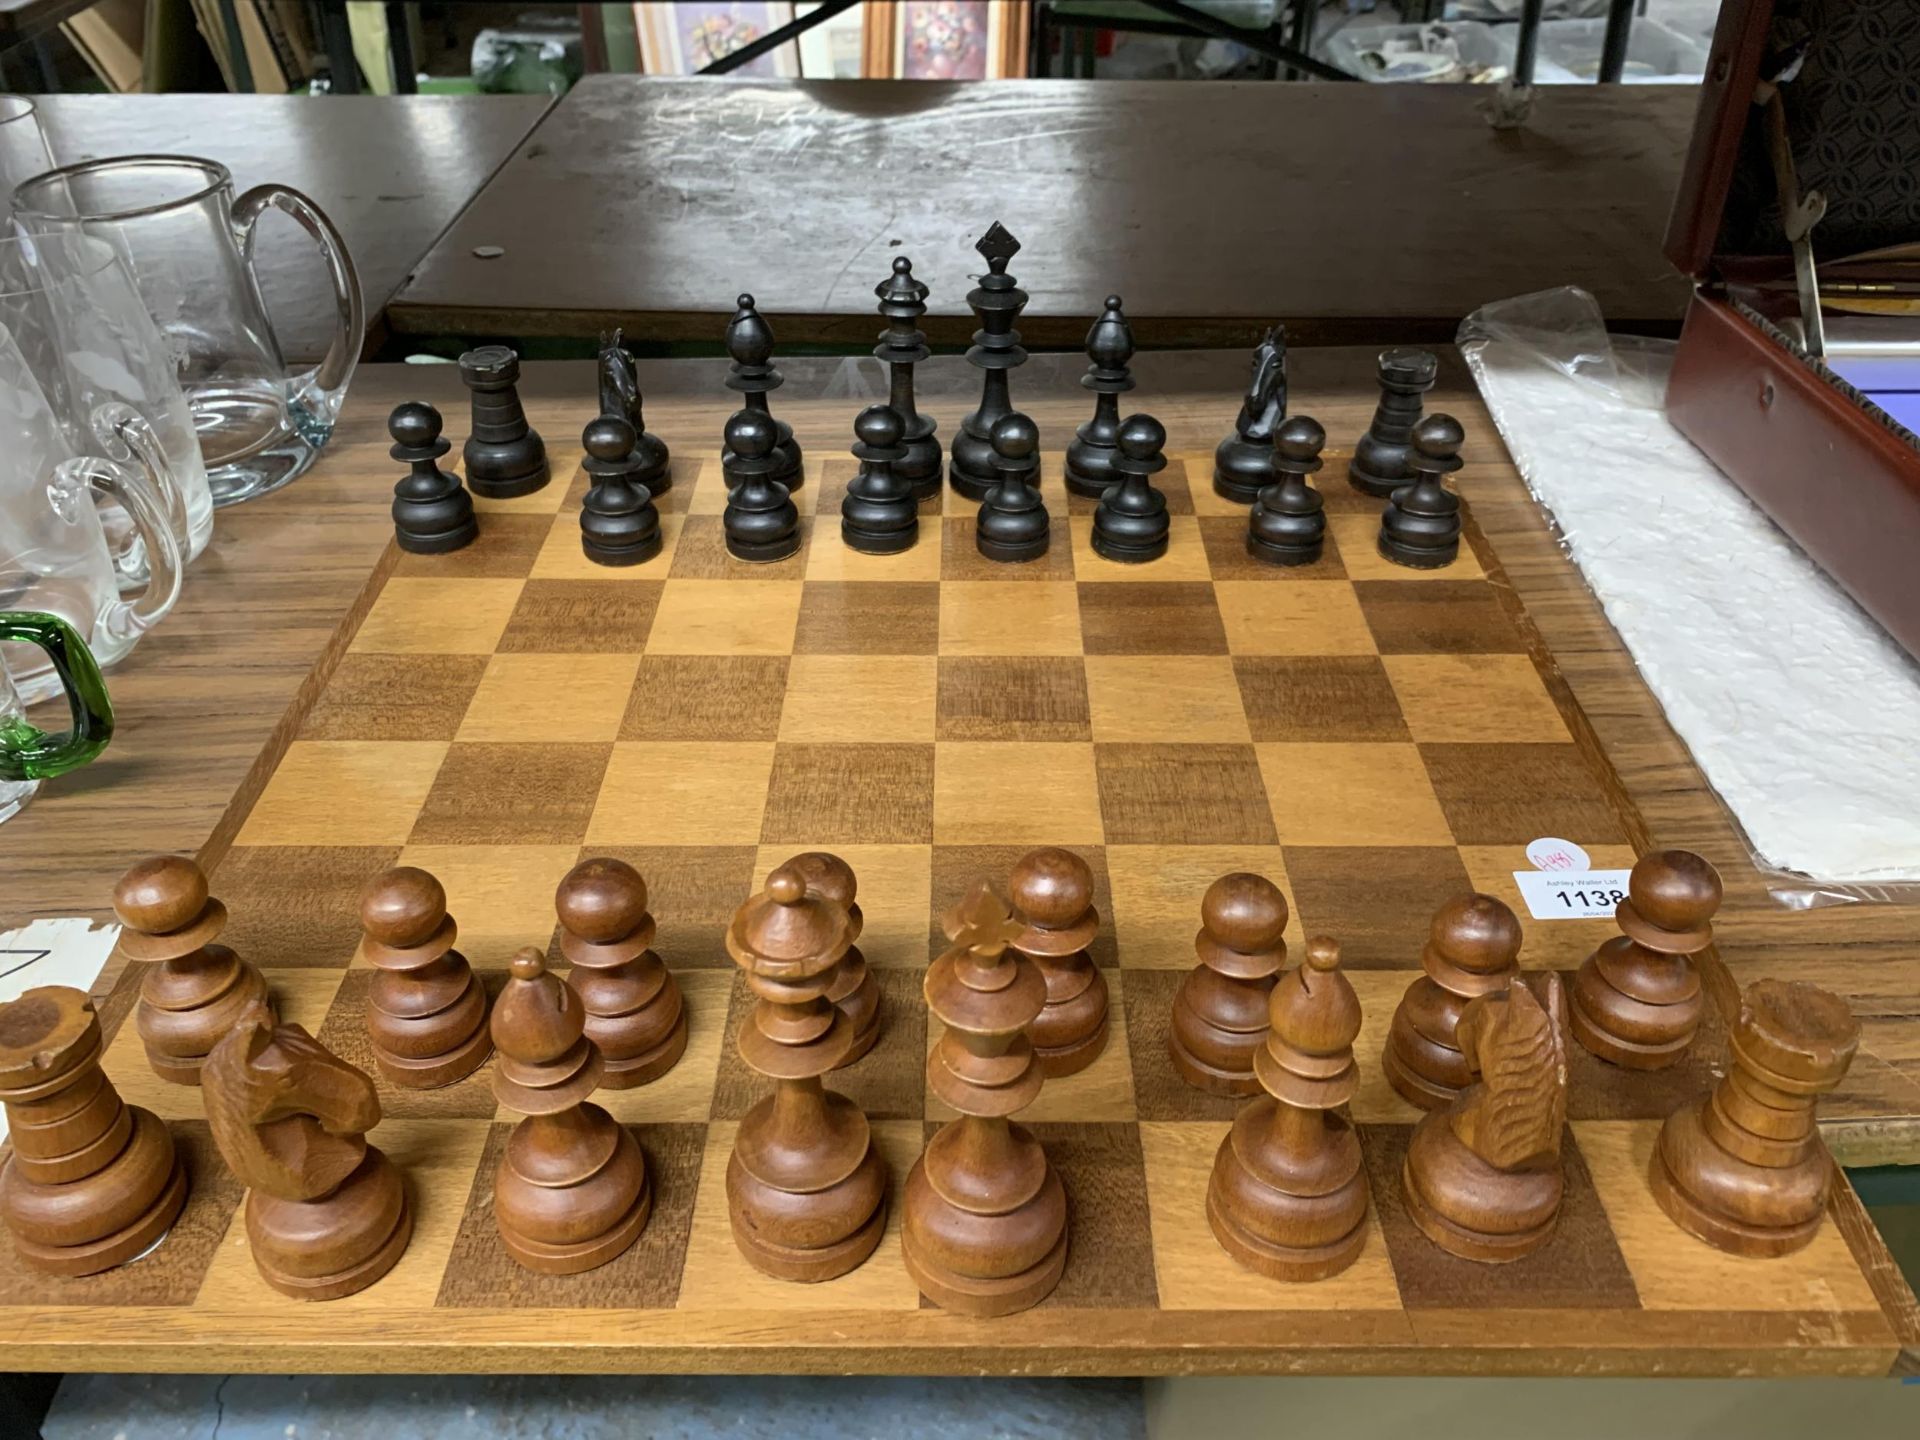 A LARGE WOODEN CHESSBOARD WITH A FULL SET OF WOODEN CHESS PIECES